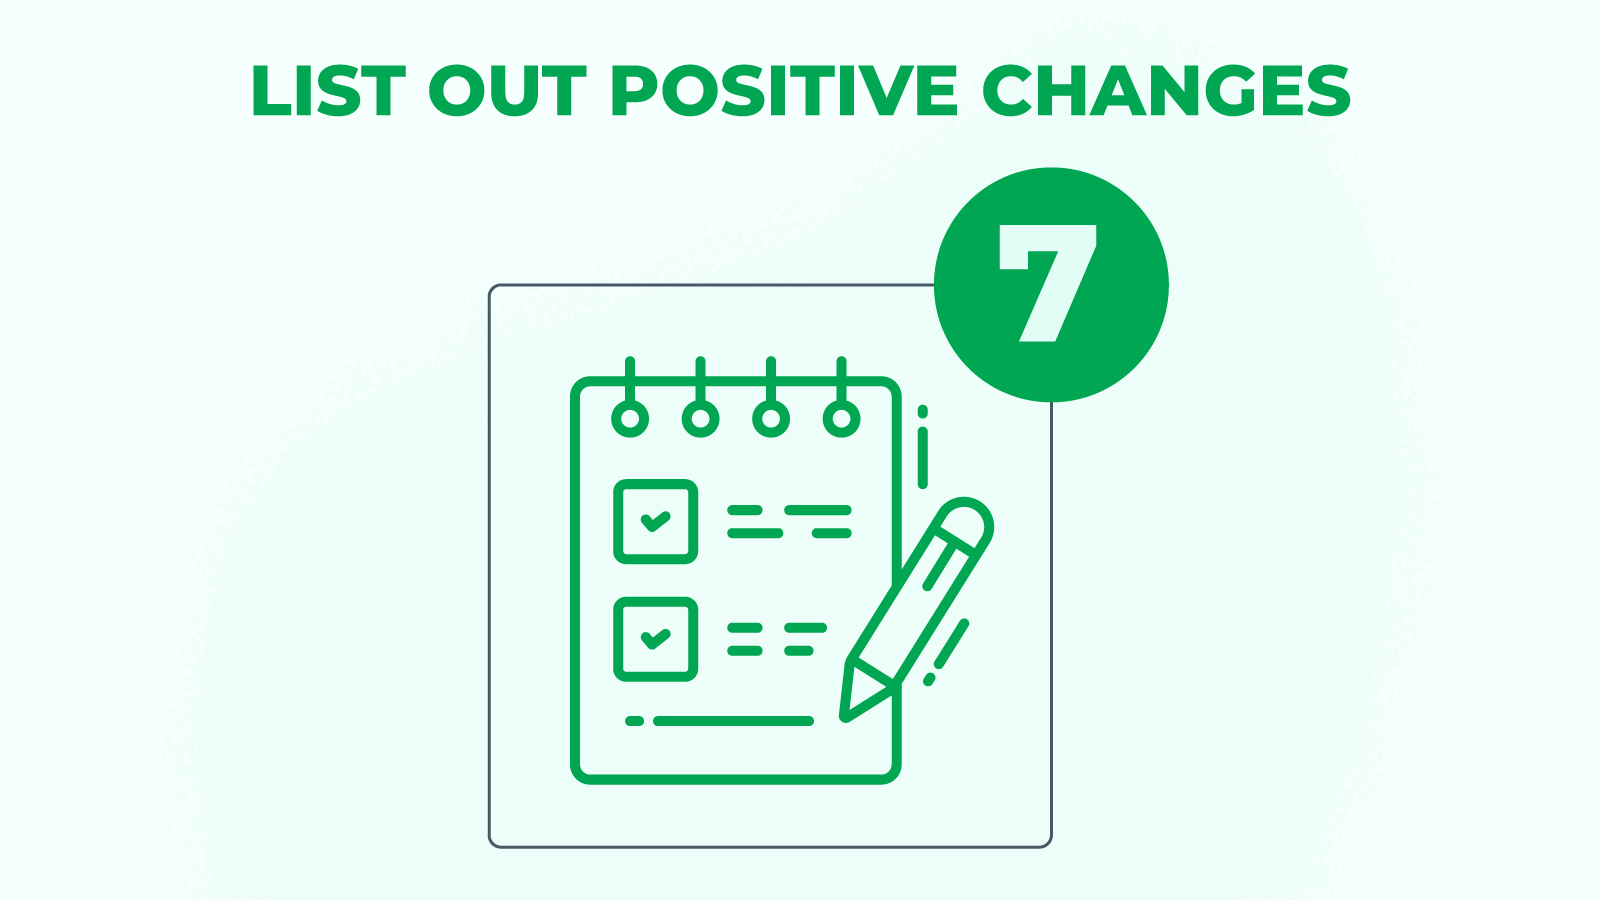 7.List out positive changes - stop gambling addiction